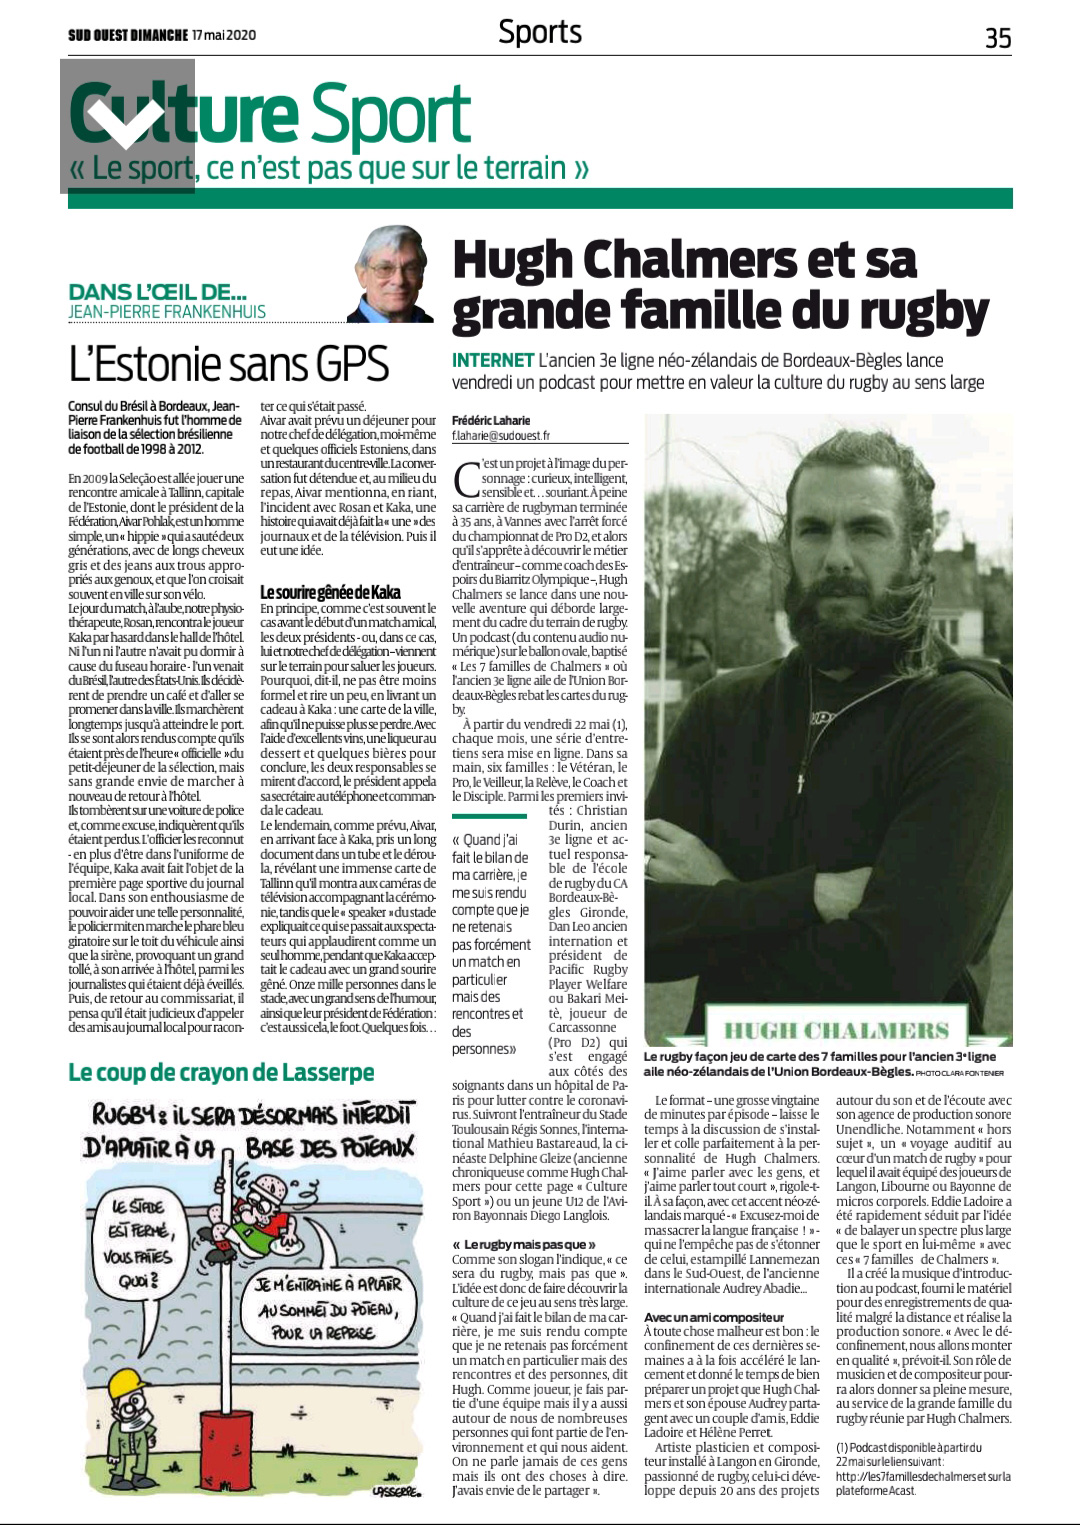 article_Sud-Ouest